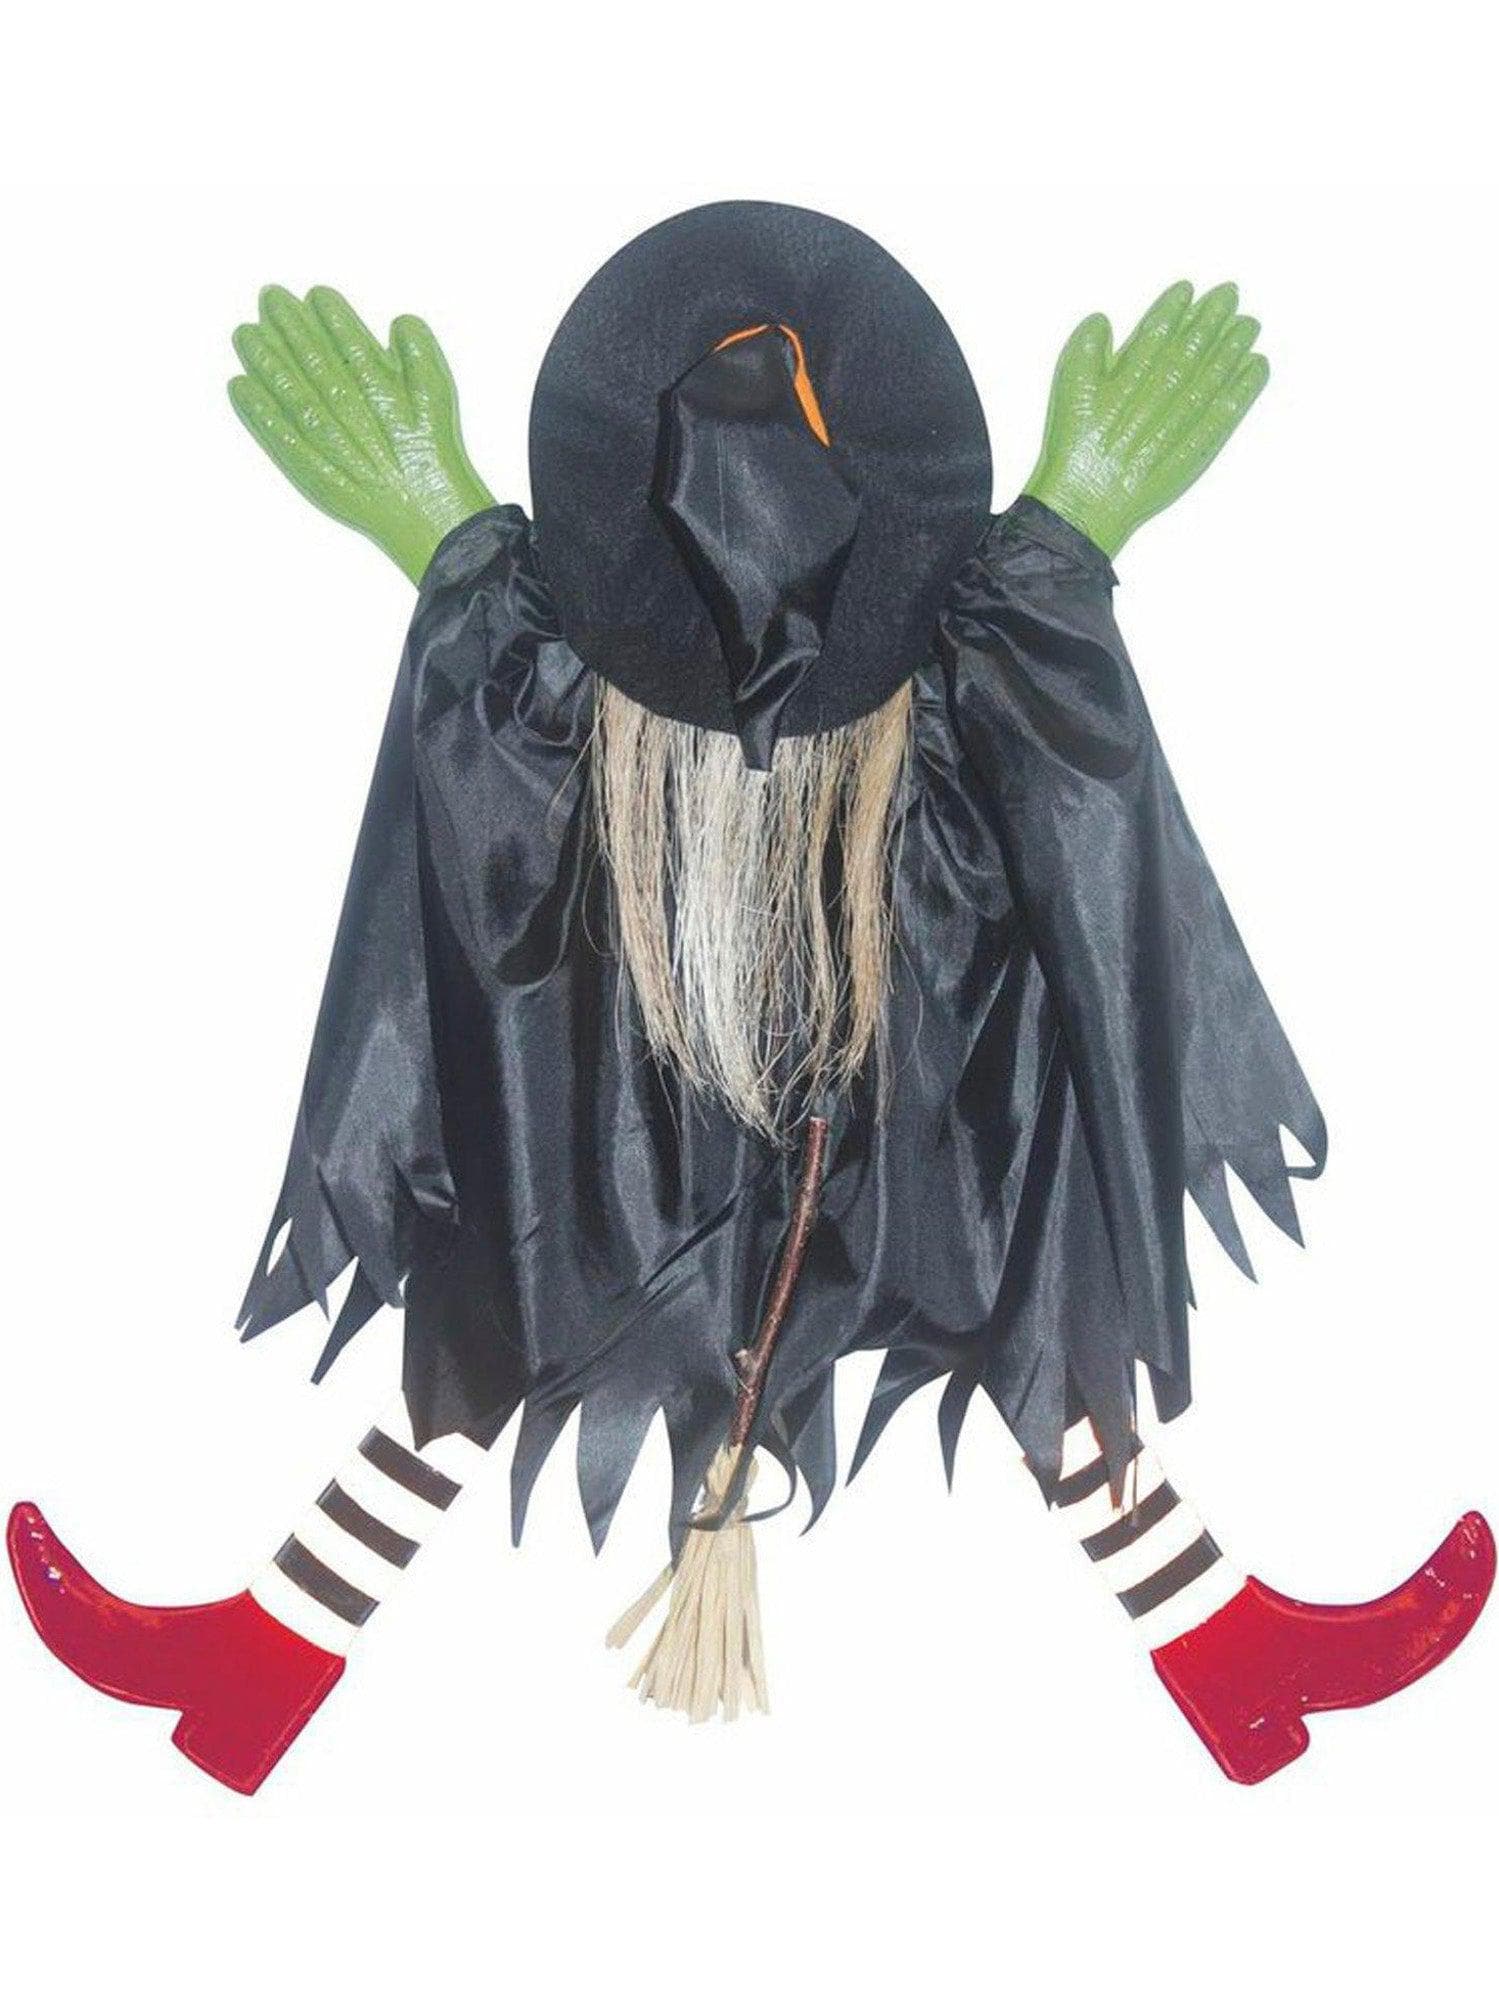 2 Foot Tree Trunk Witch Prop - costumes.com